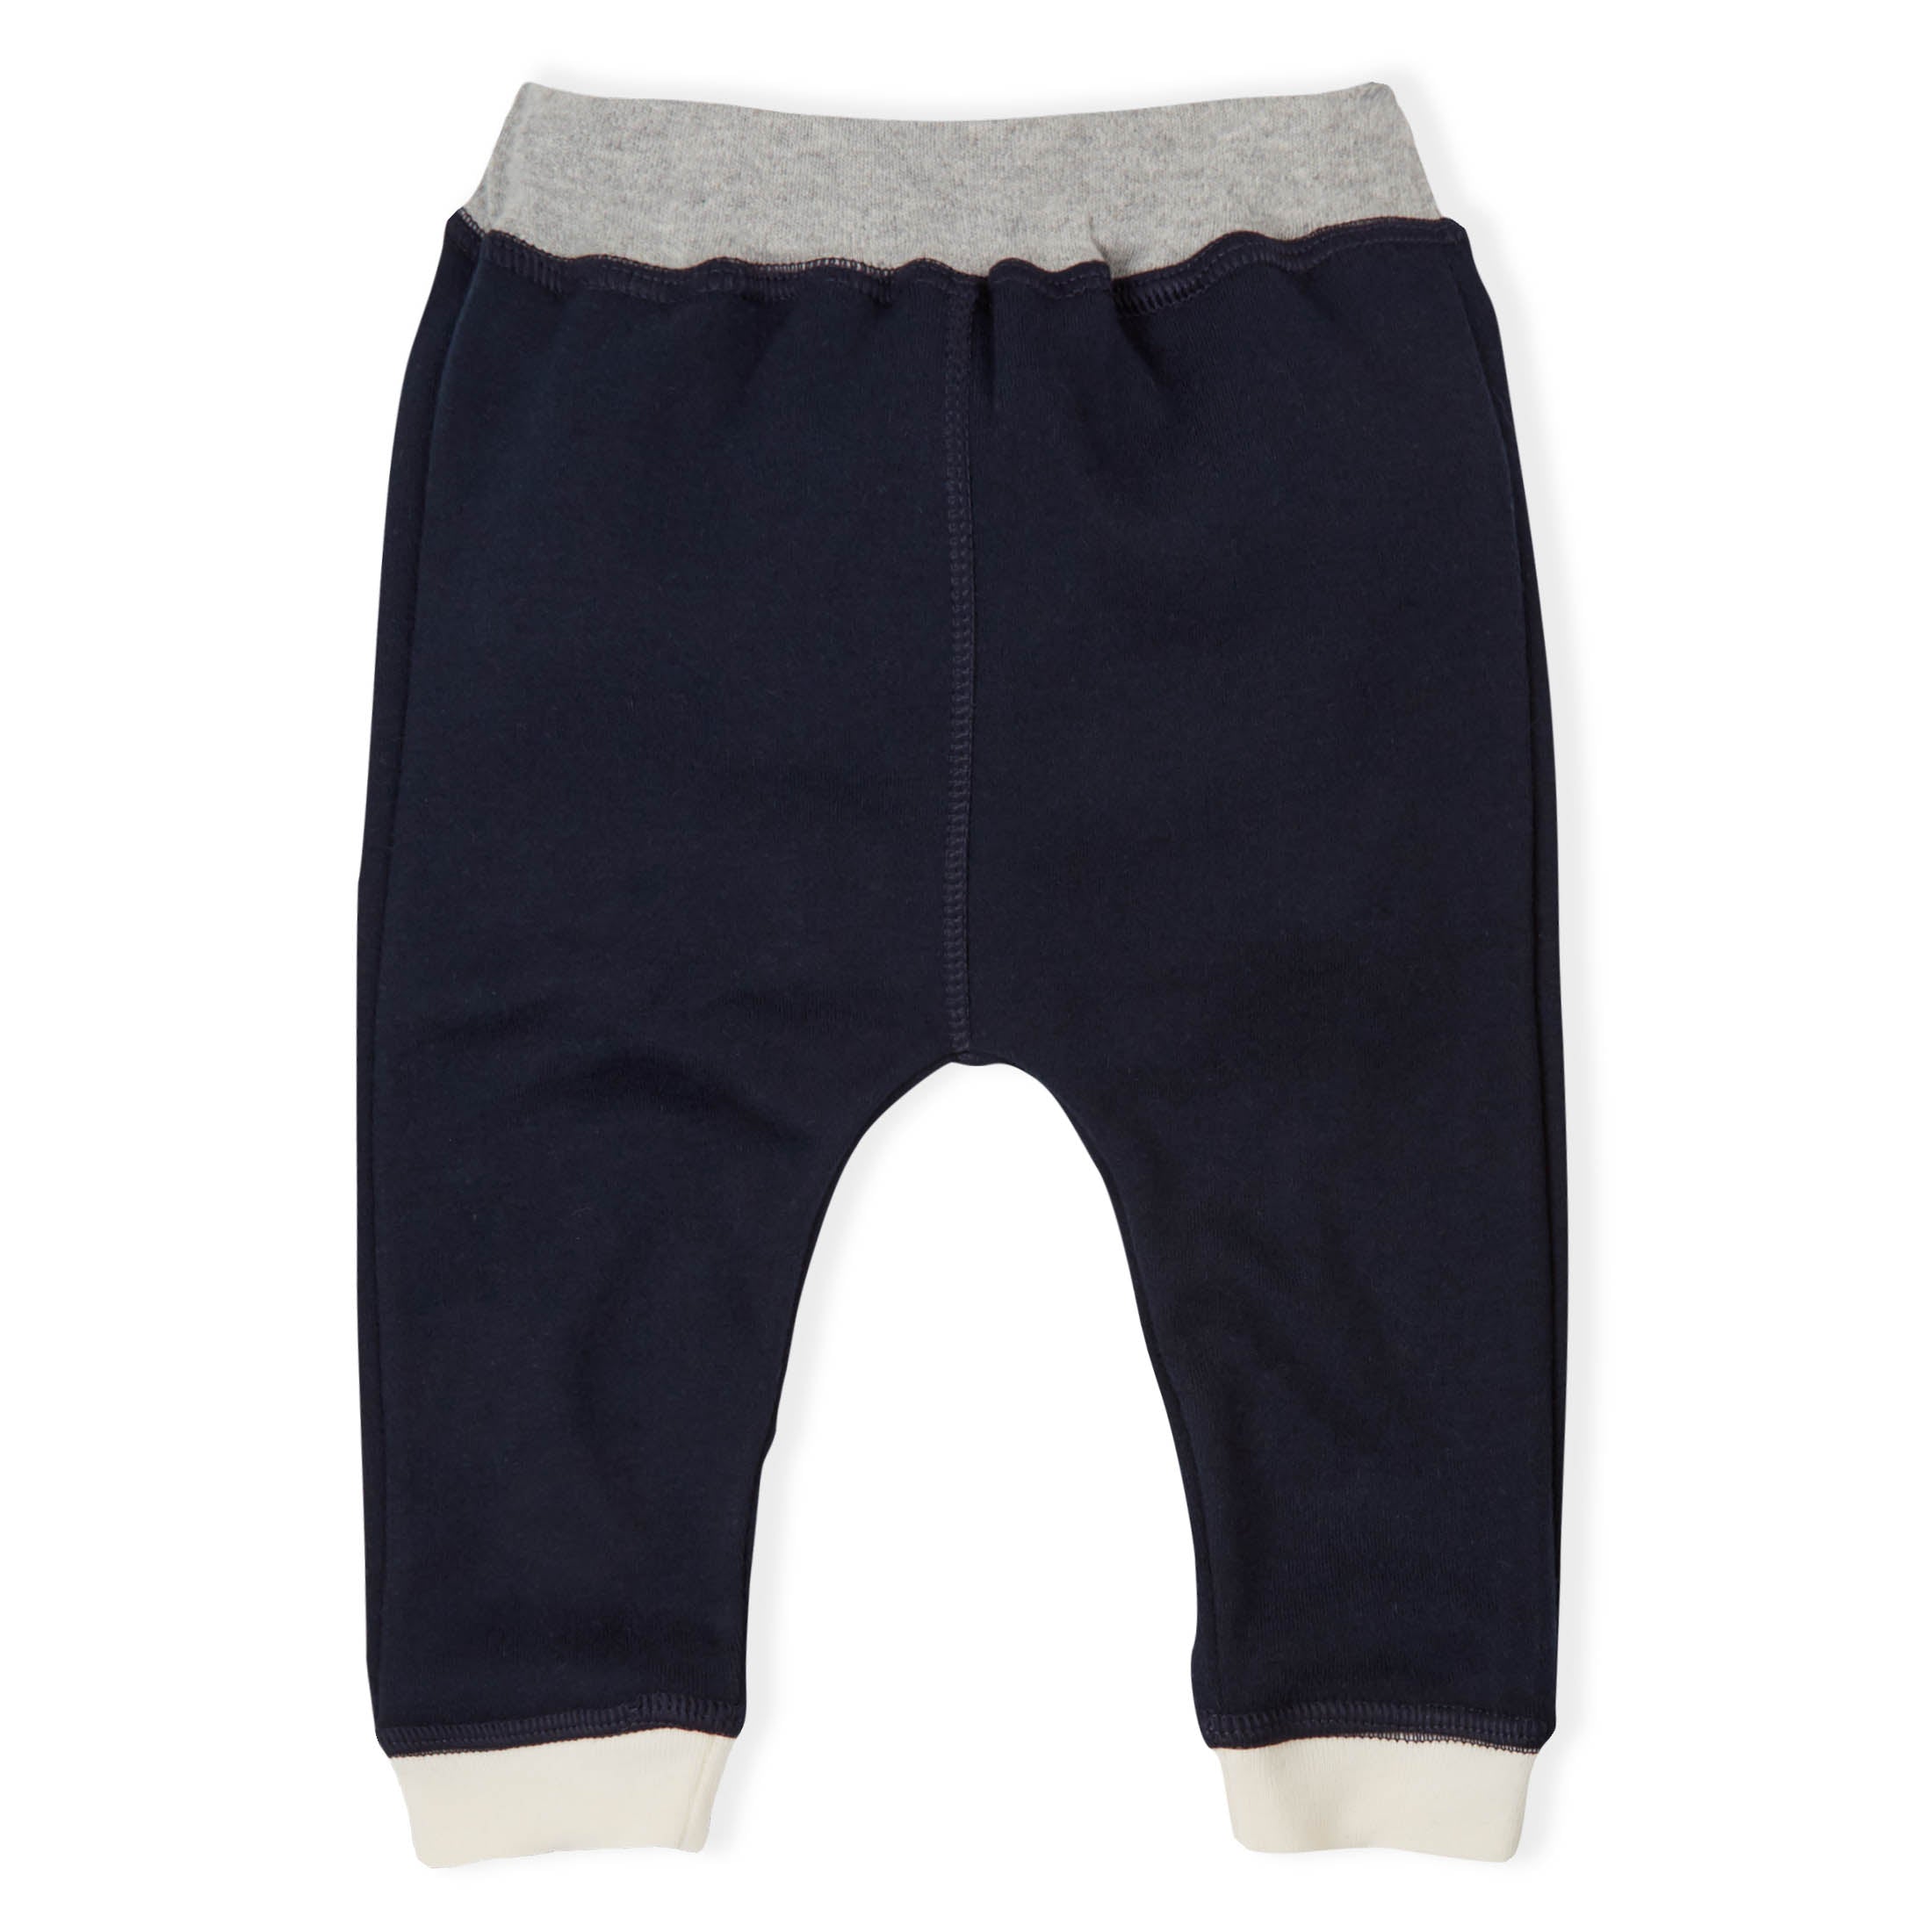 Organic Zoo Pants with Contrast Cuffs